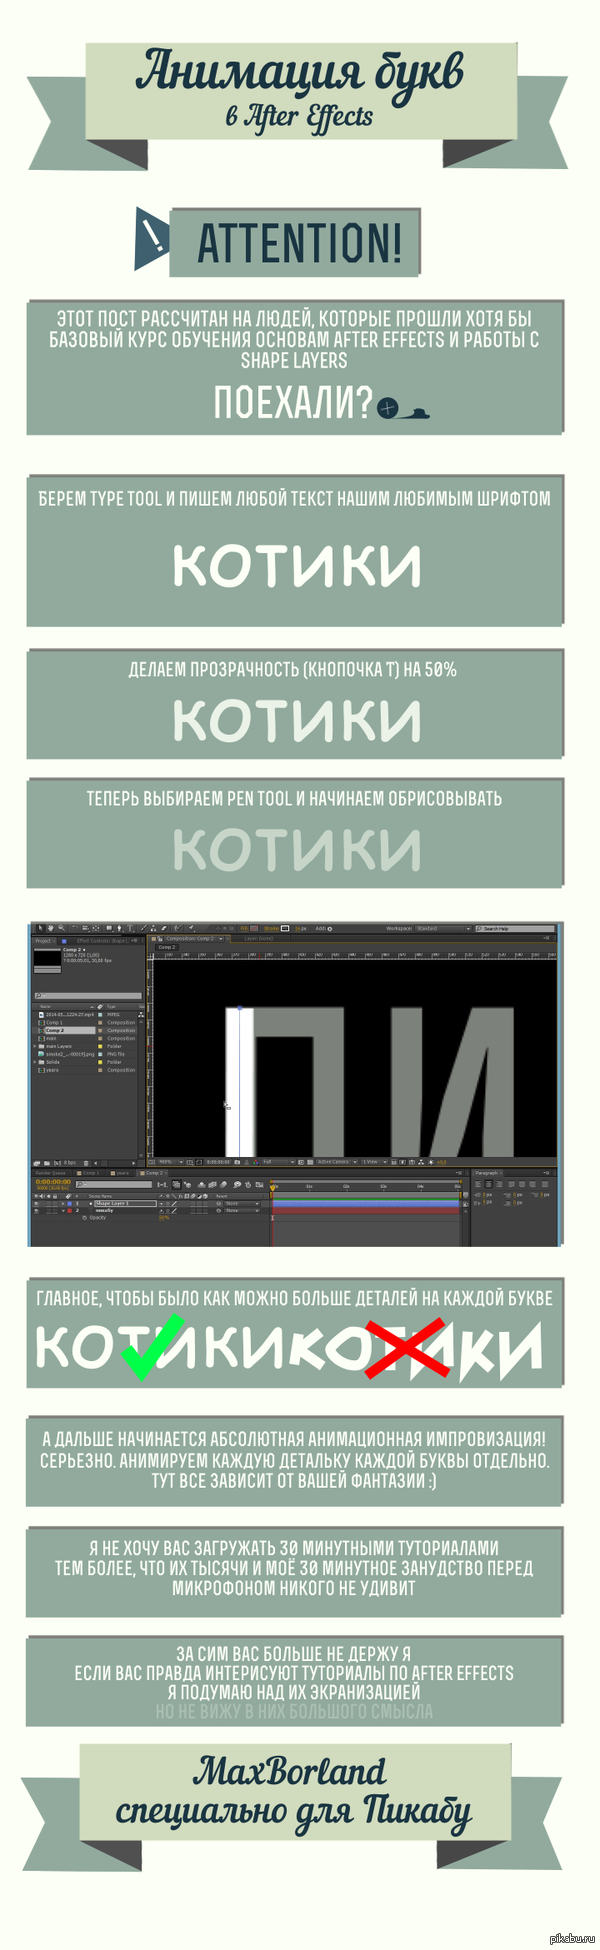     After Effects?      gif-,         (25  ) . :(        :)